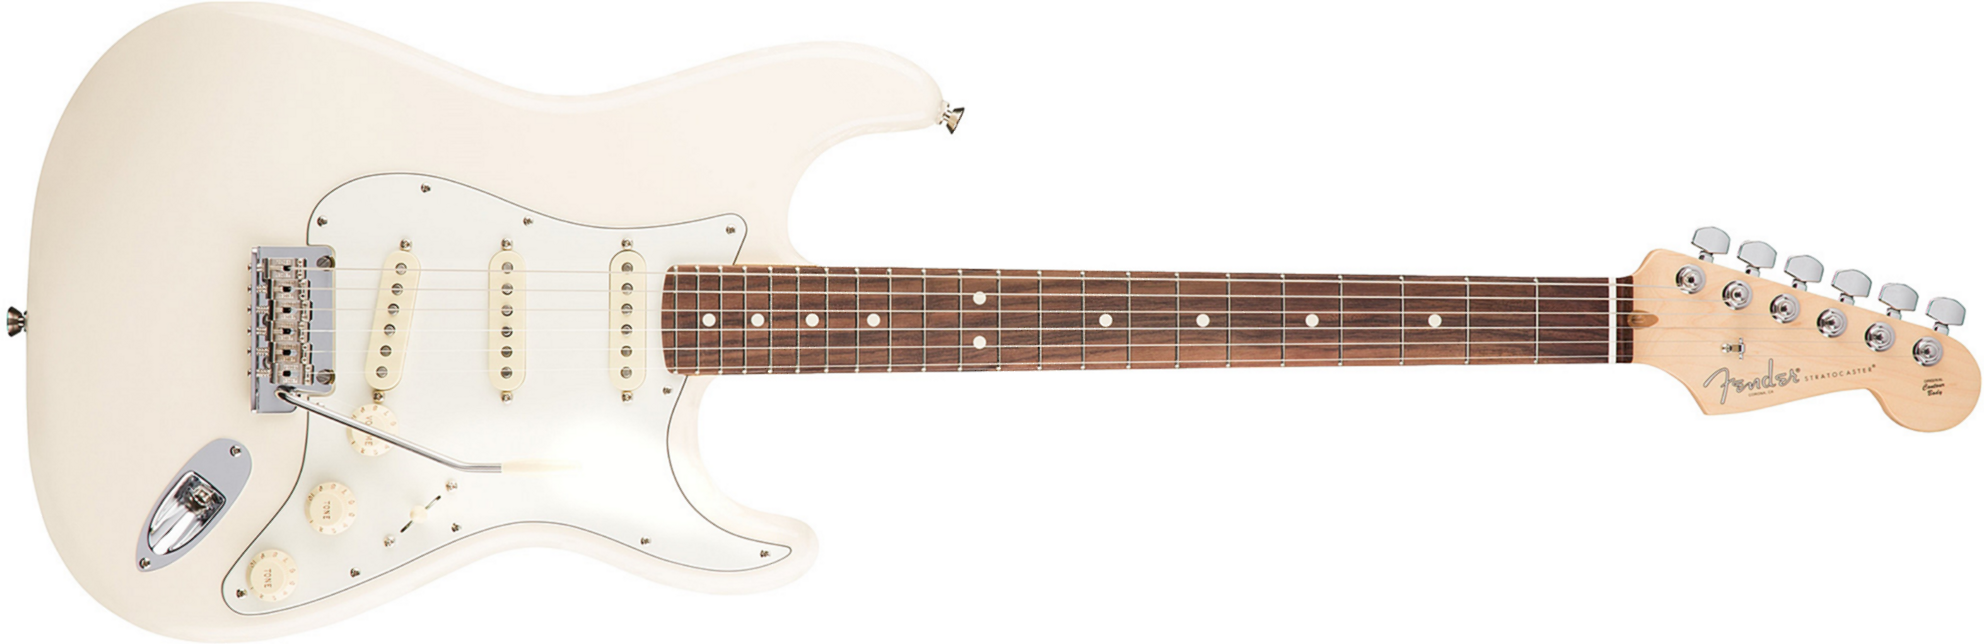 Fender Strat American Professional 2017 3s Usa Rw - Olympic White - E-Gitarre in Str-Form - Main picture